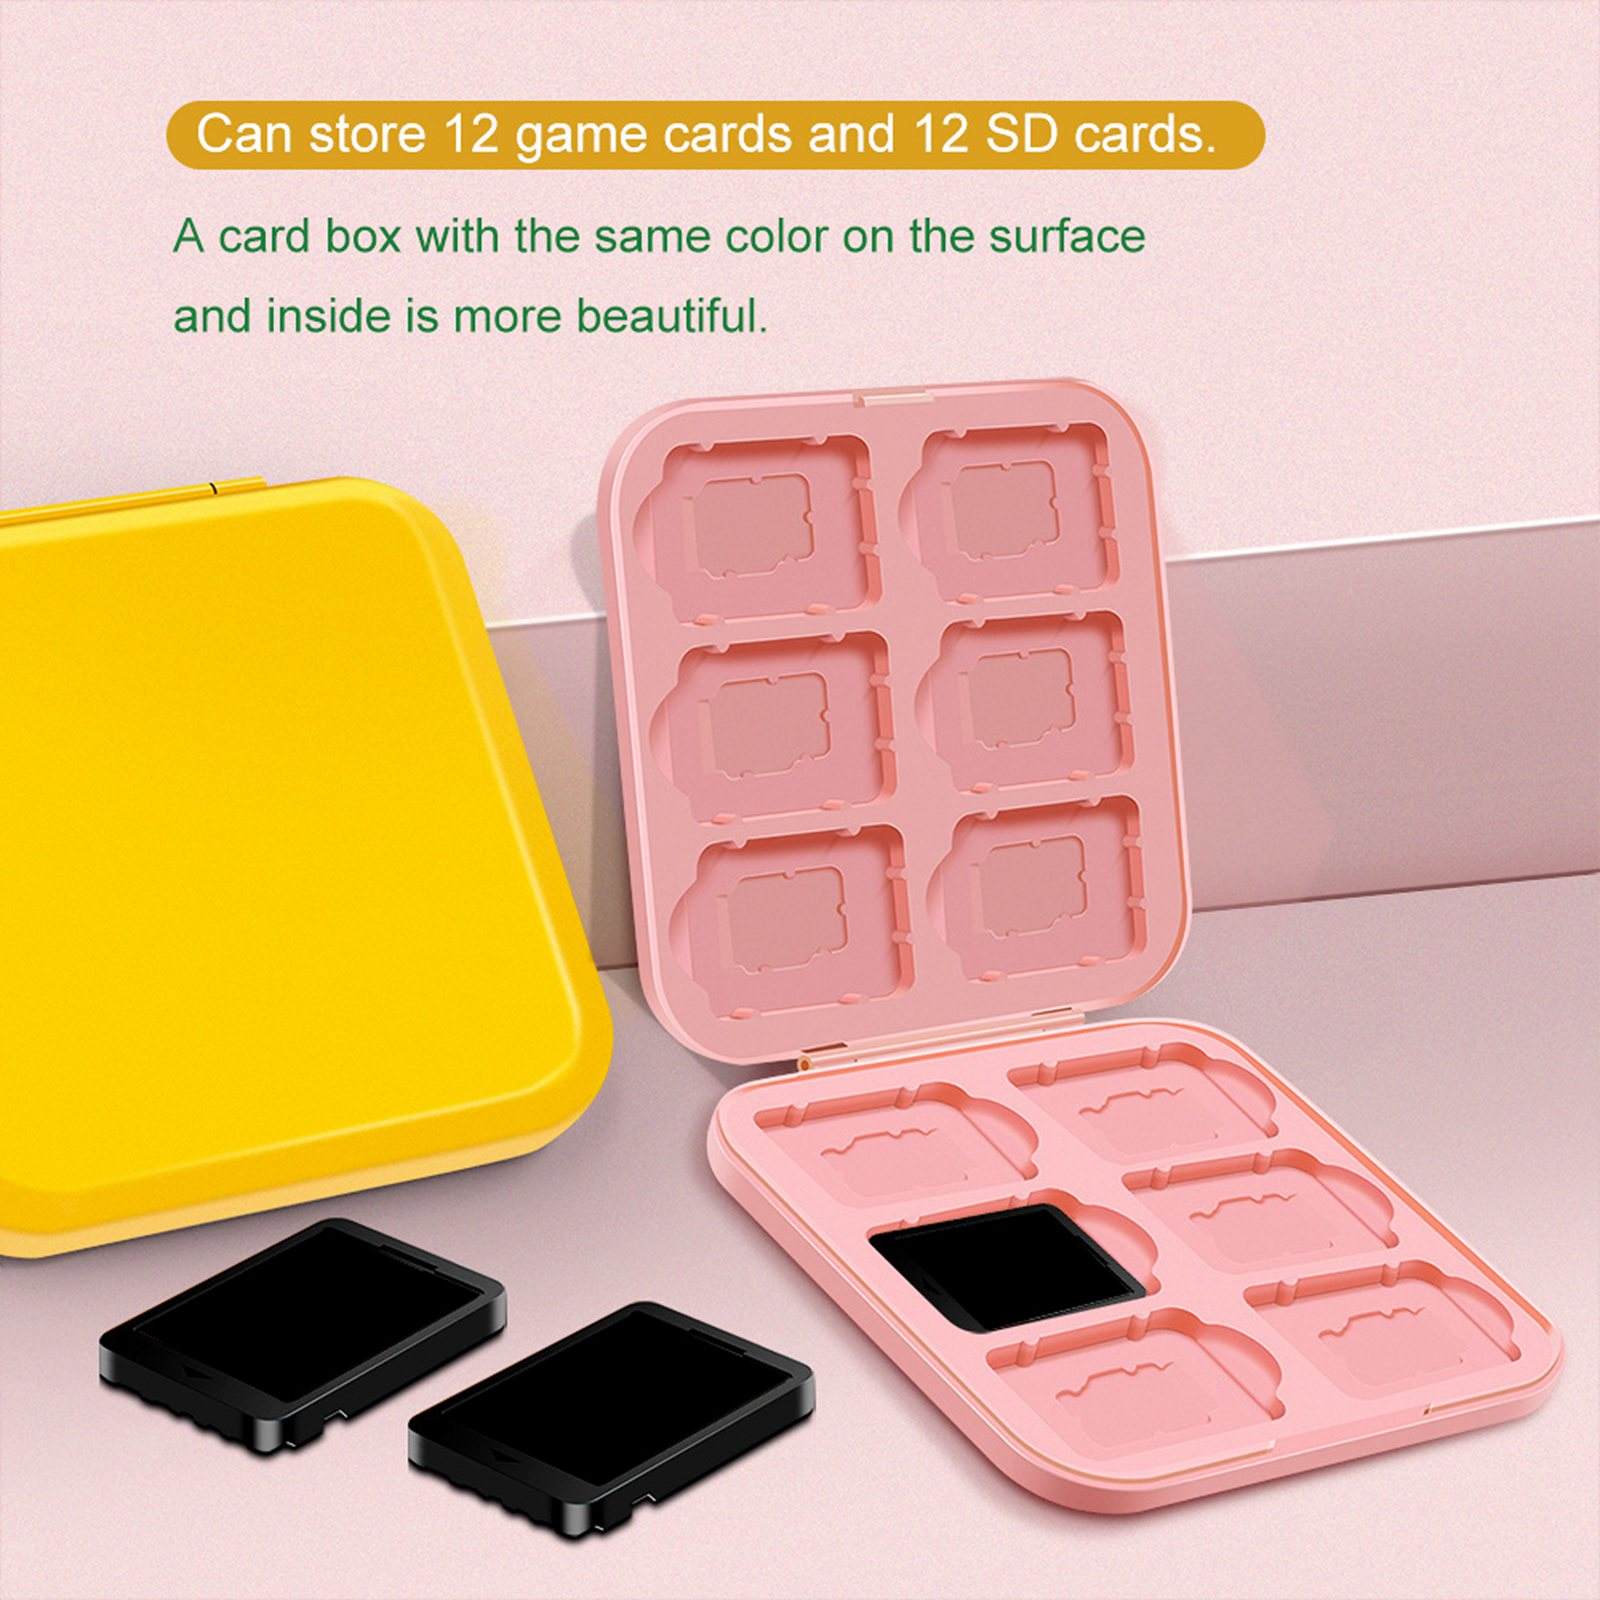 2 Pieces 12 In 1 Game Card Case Carrying Storage Box for Nintend Switch